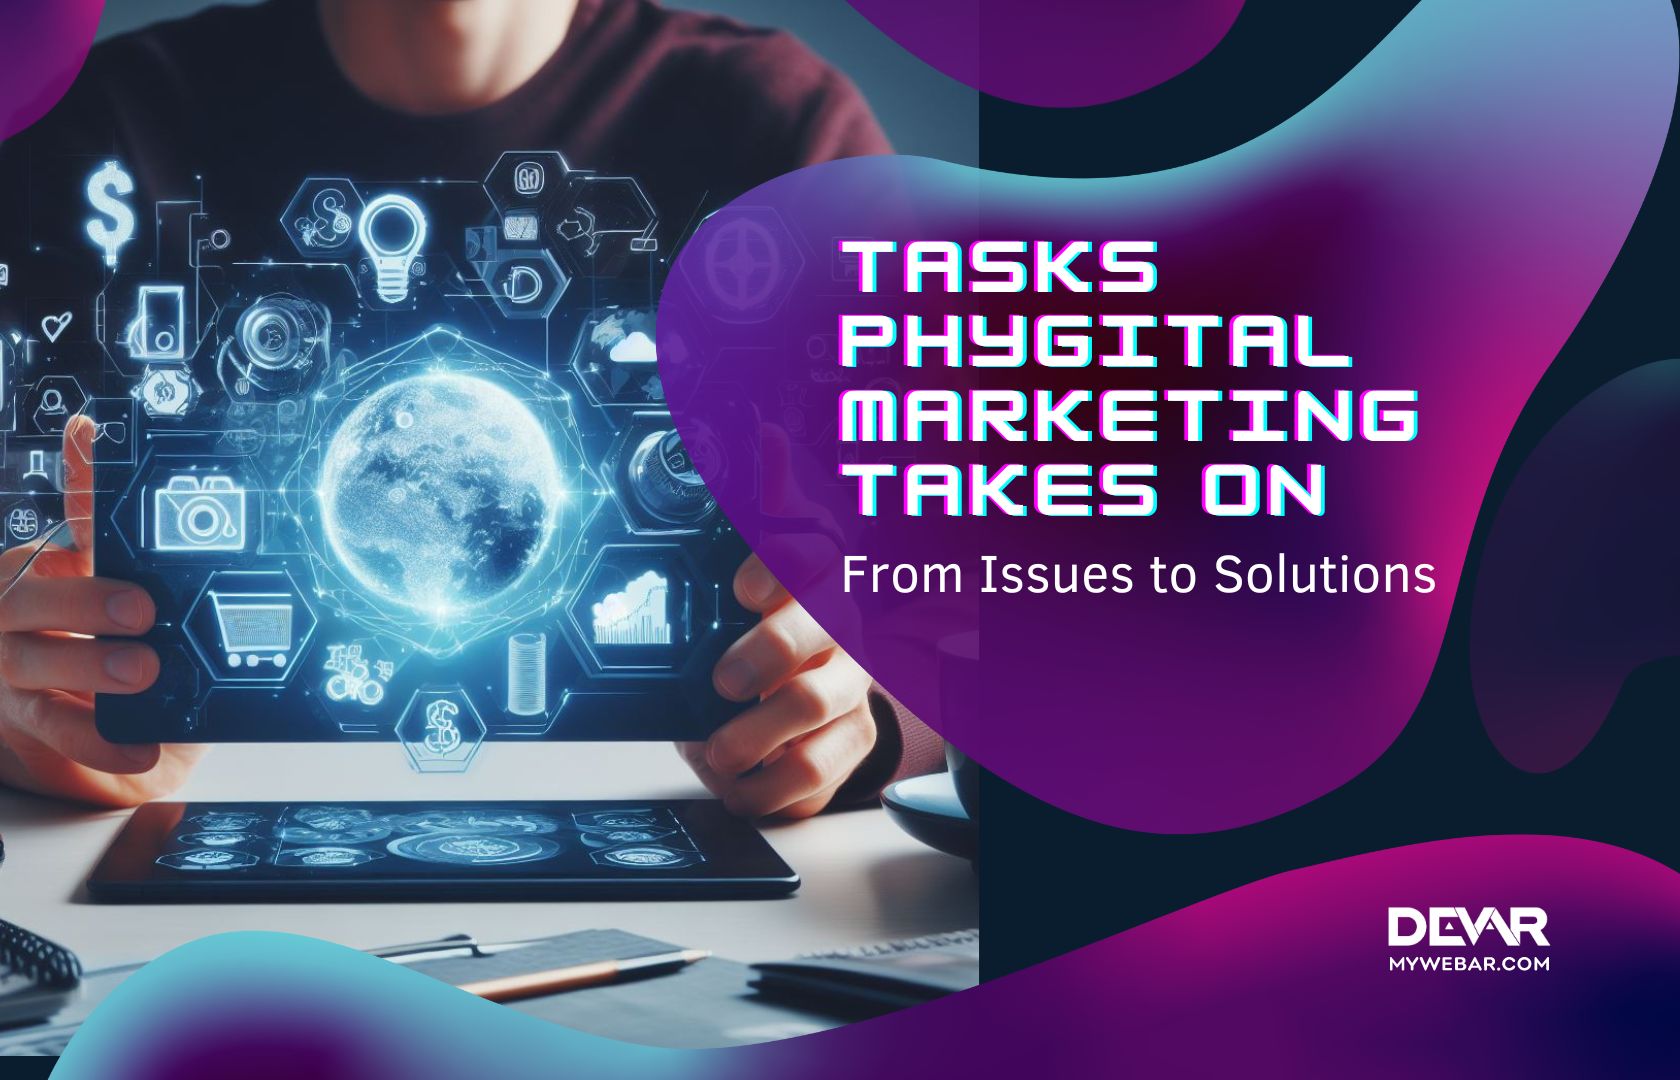 From Issues to Solutions: Tasks Phygital Marketing Takes On